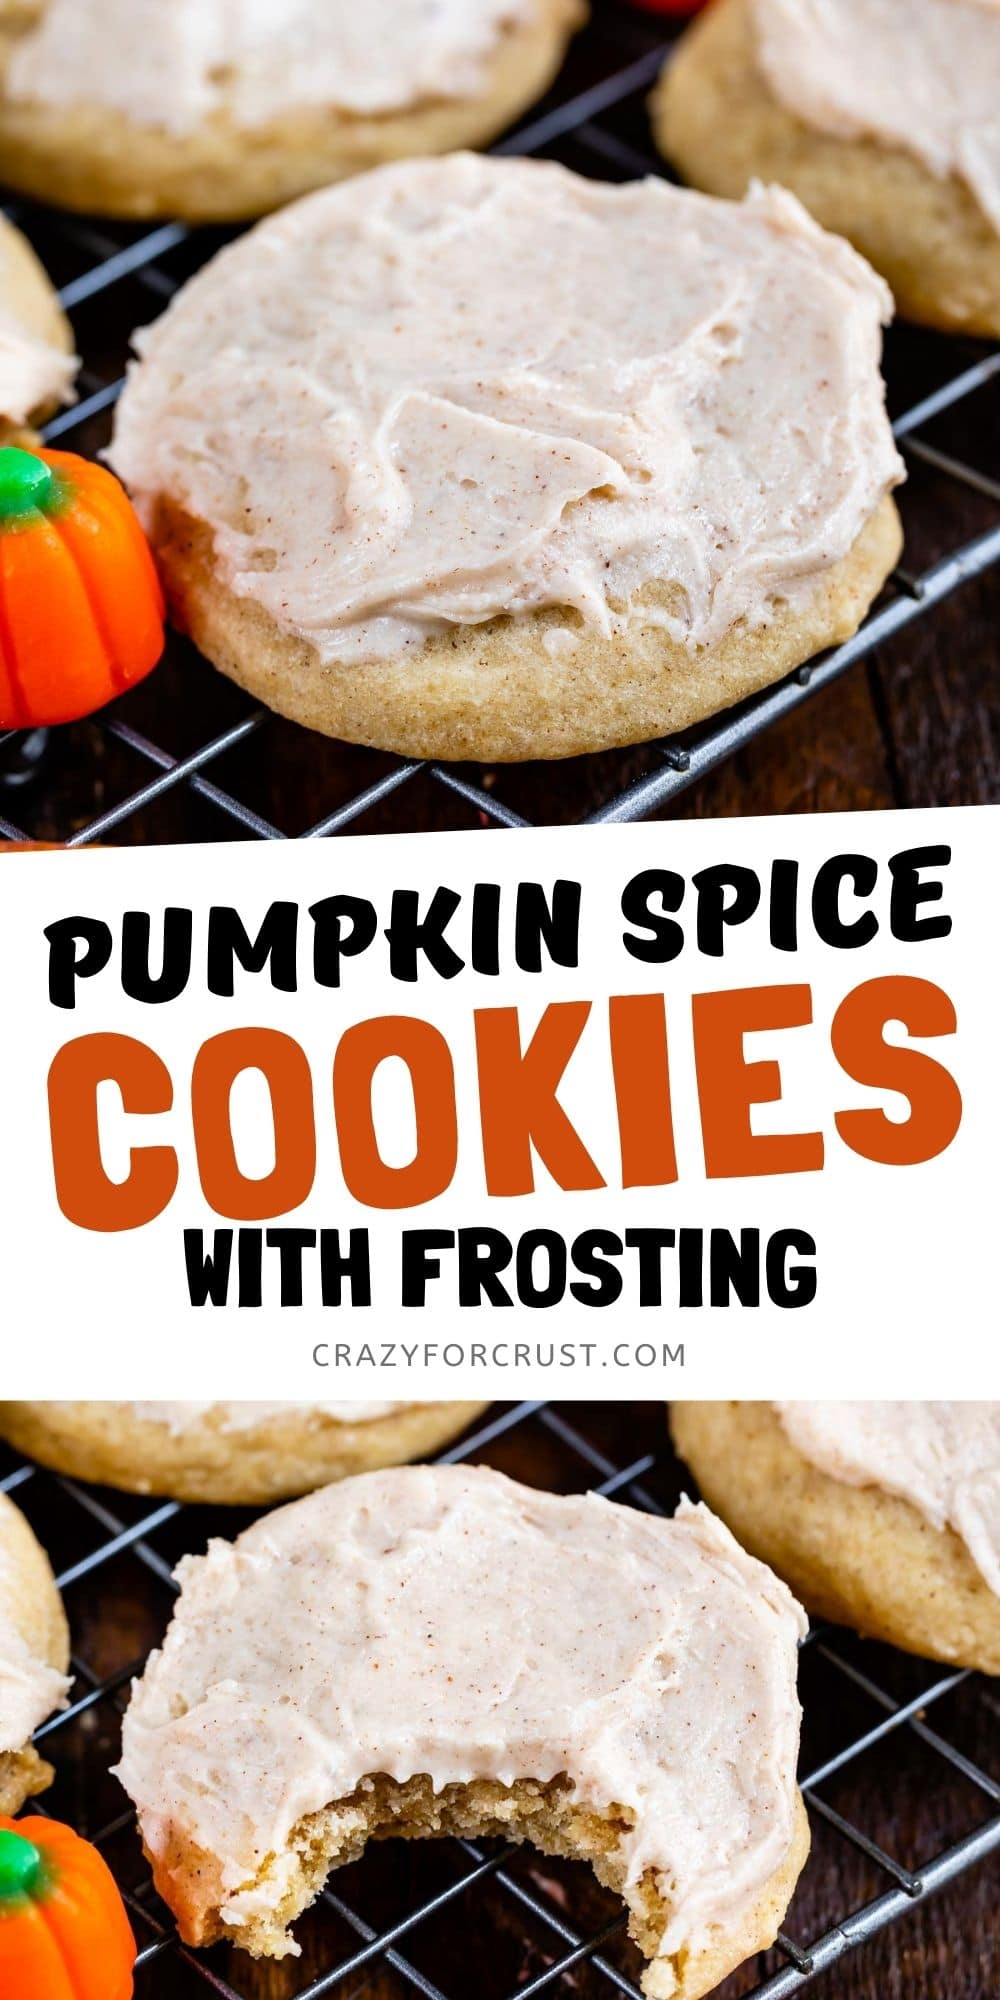 Pumpkin Spice Cookies (with frosting) - Crazy for Crust